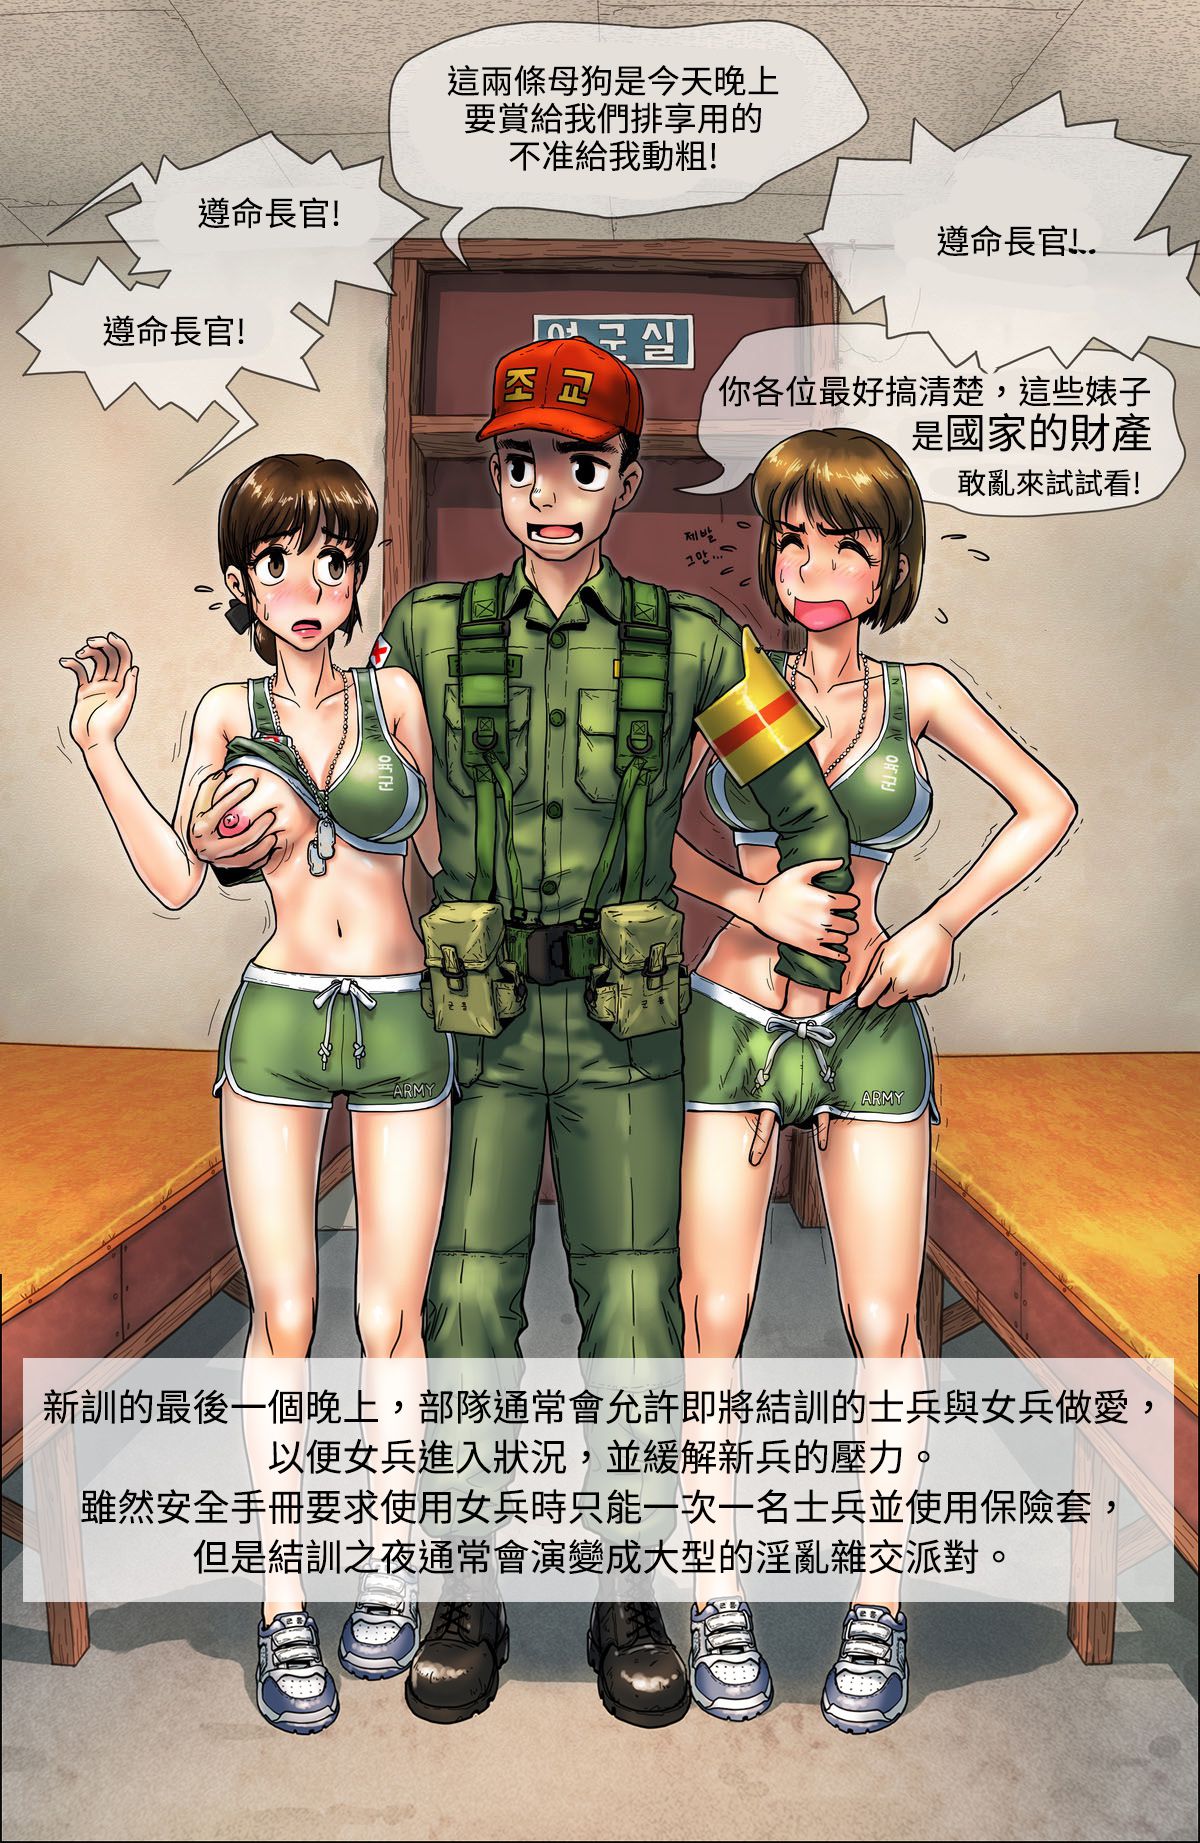 [GOGOCHERRY] Hell of female soldier|女兵地獄 (Ongoing)[Chinese][張順瑋個人漢化] 13